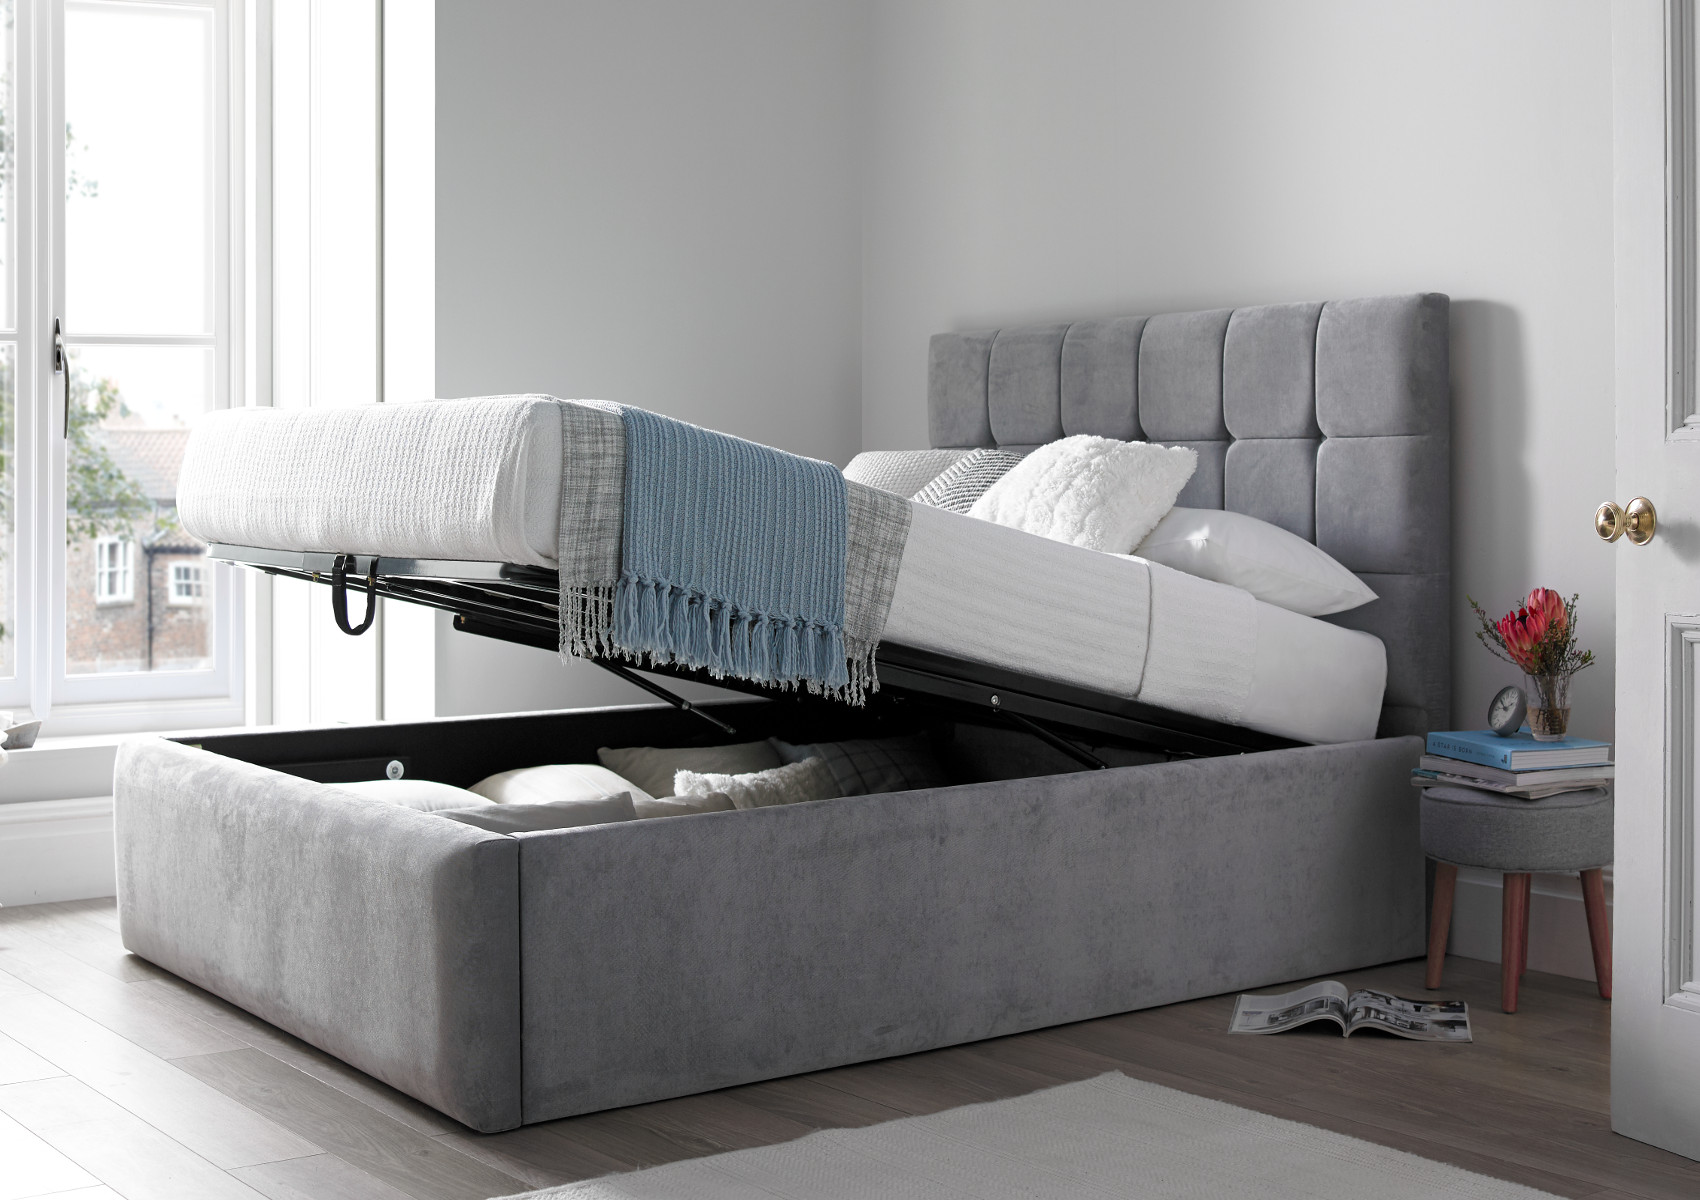 View Bromley Naples Mink Upholstered Super King Ottoman Bed Time4Sleep information